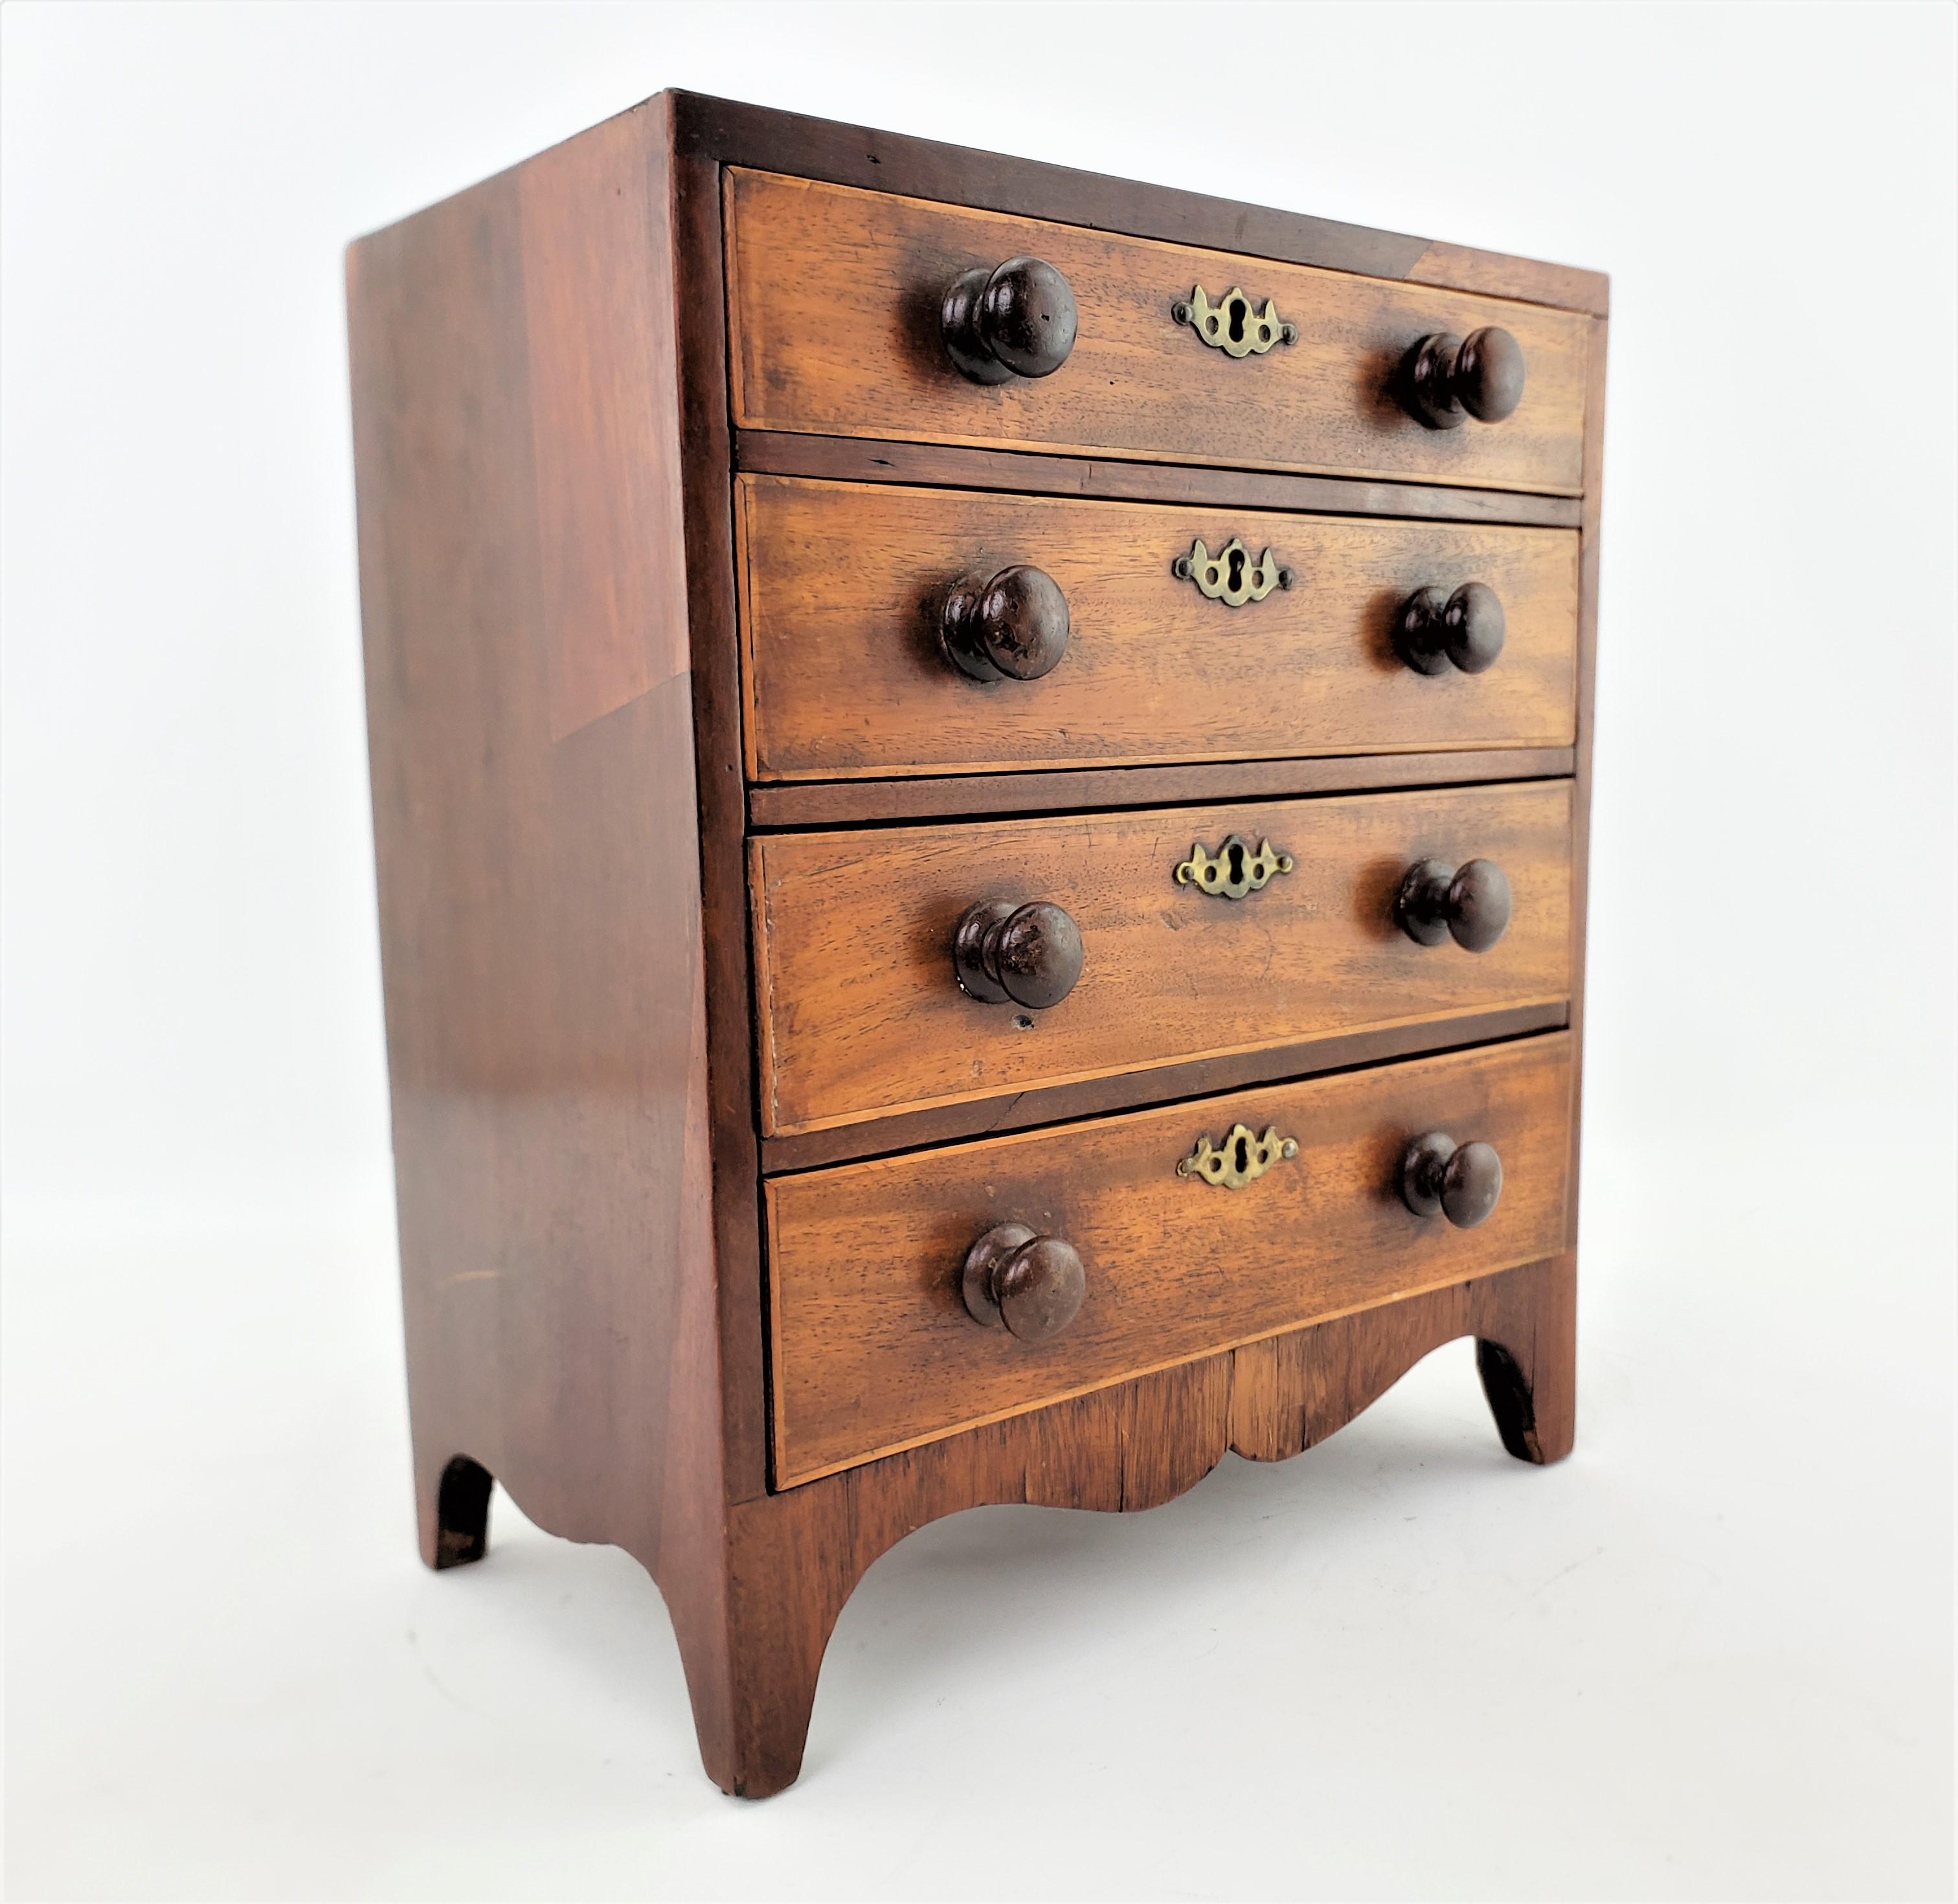 This minature table top sized chest of drawers is unsigned, but presumed to have originated from the United States and date to approximately 1880 and done in a Colonial style. This nicely exectued four drawer miniature tall boy is done with solid